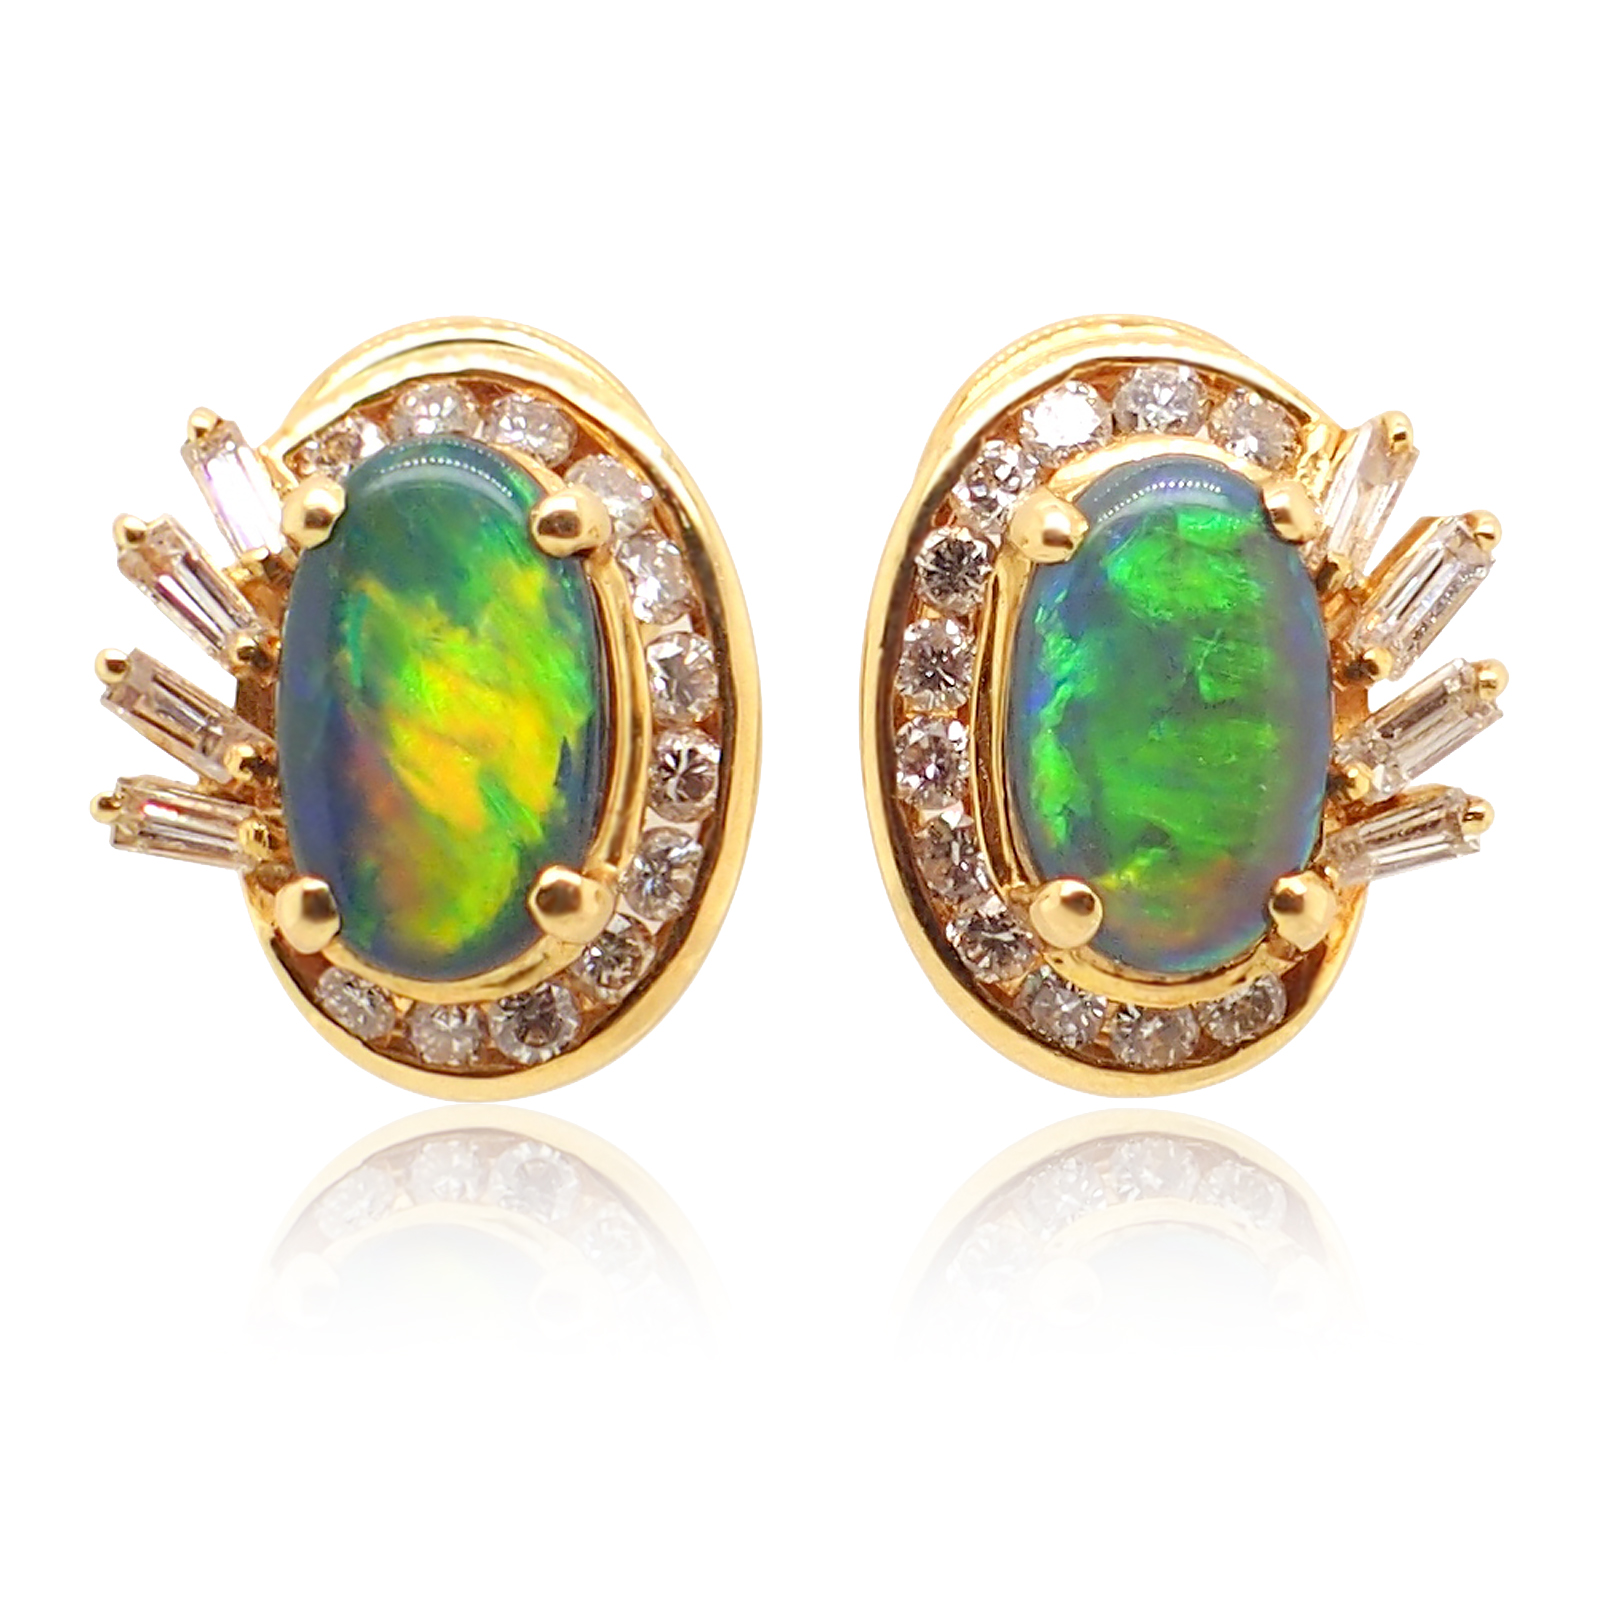 9ct Yellow Gold 6mm Opal Solitaire Oval Shape Stud Earrings | Buy Online |  Free Insured UK Delivery